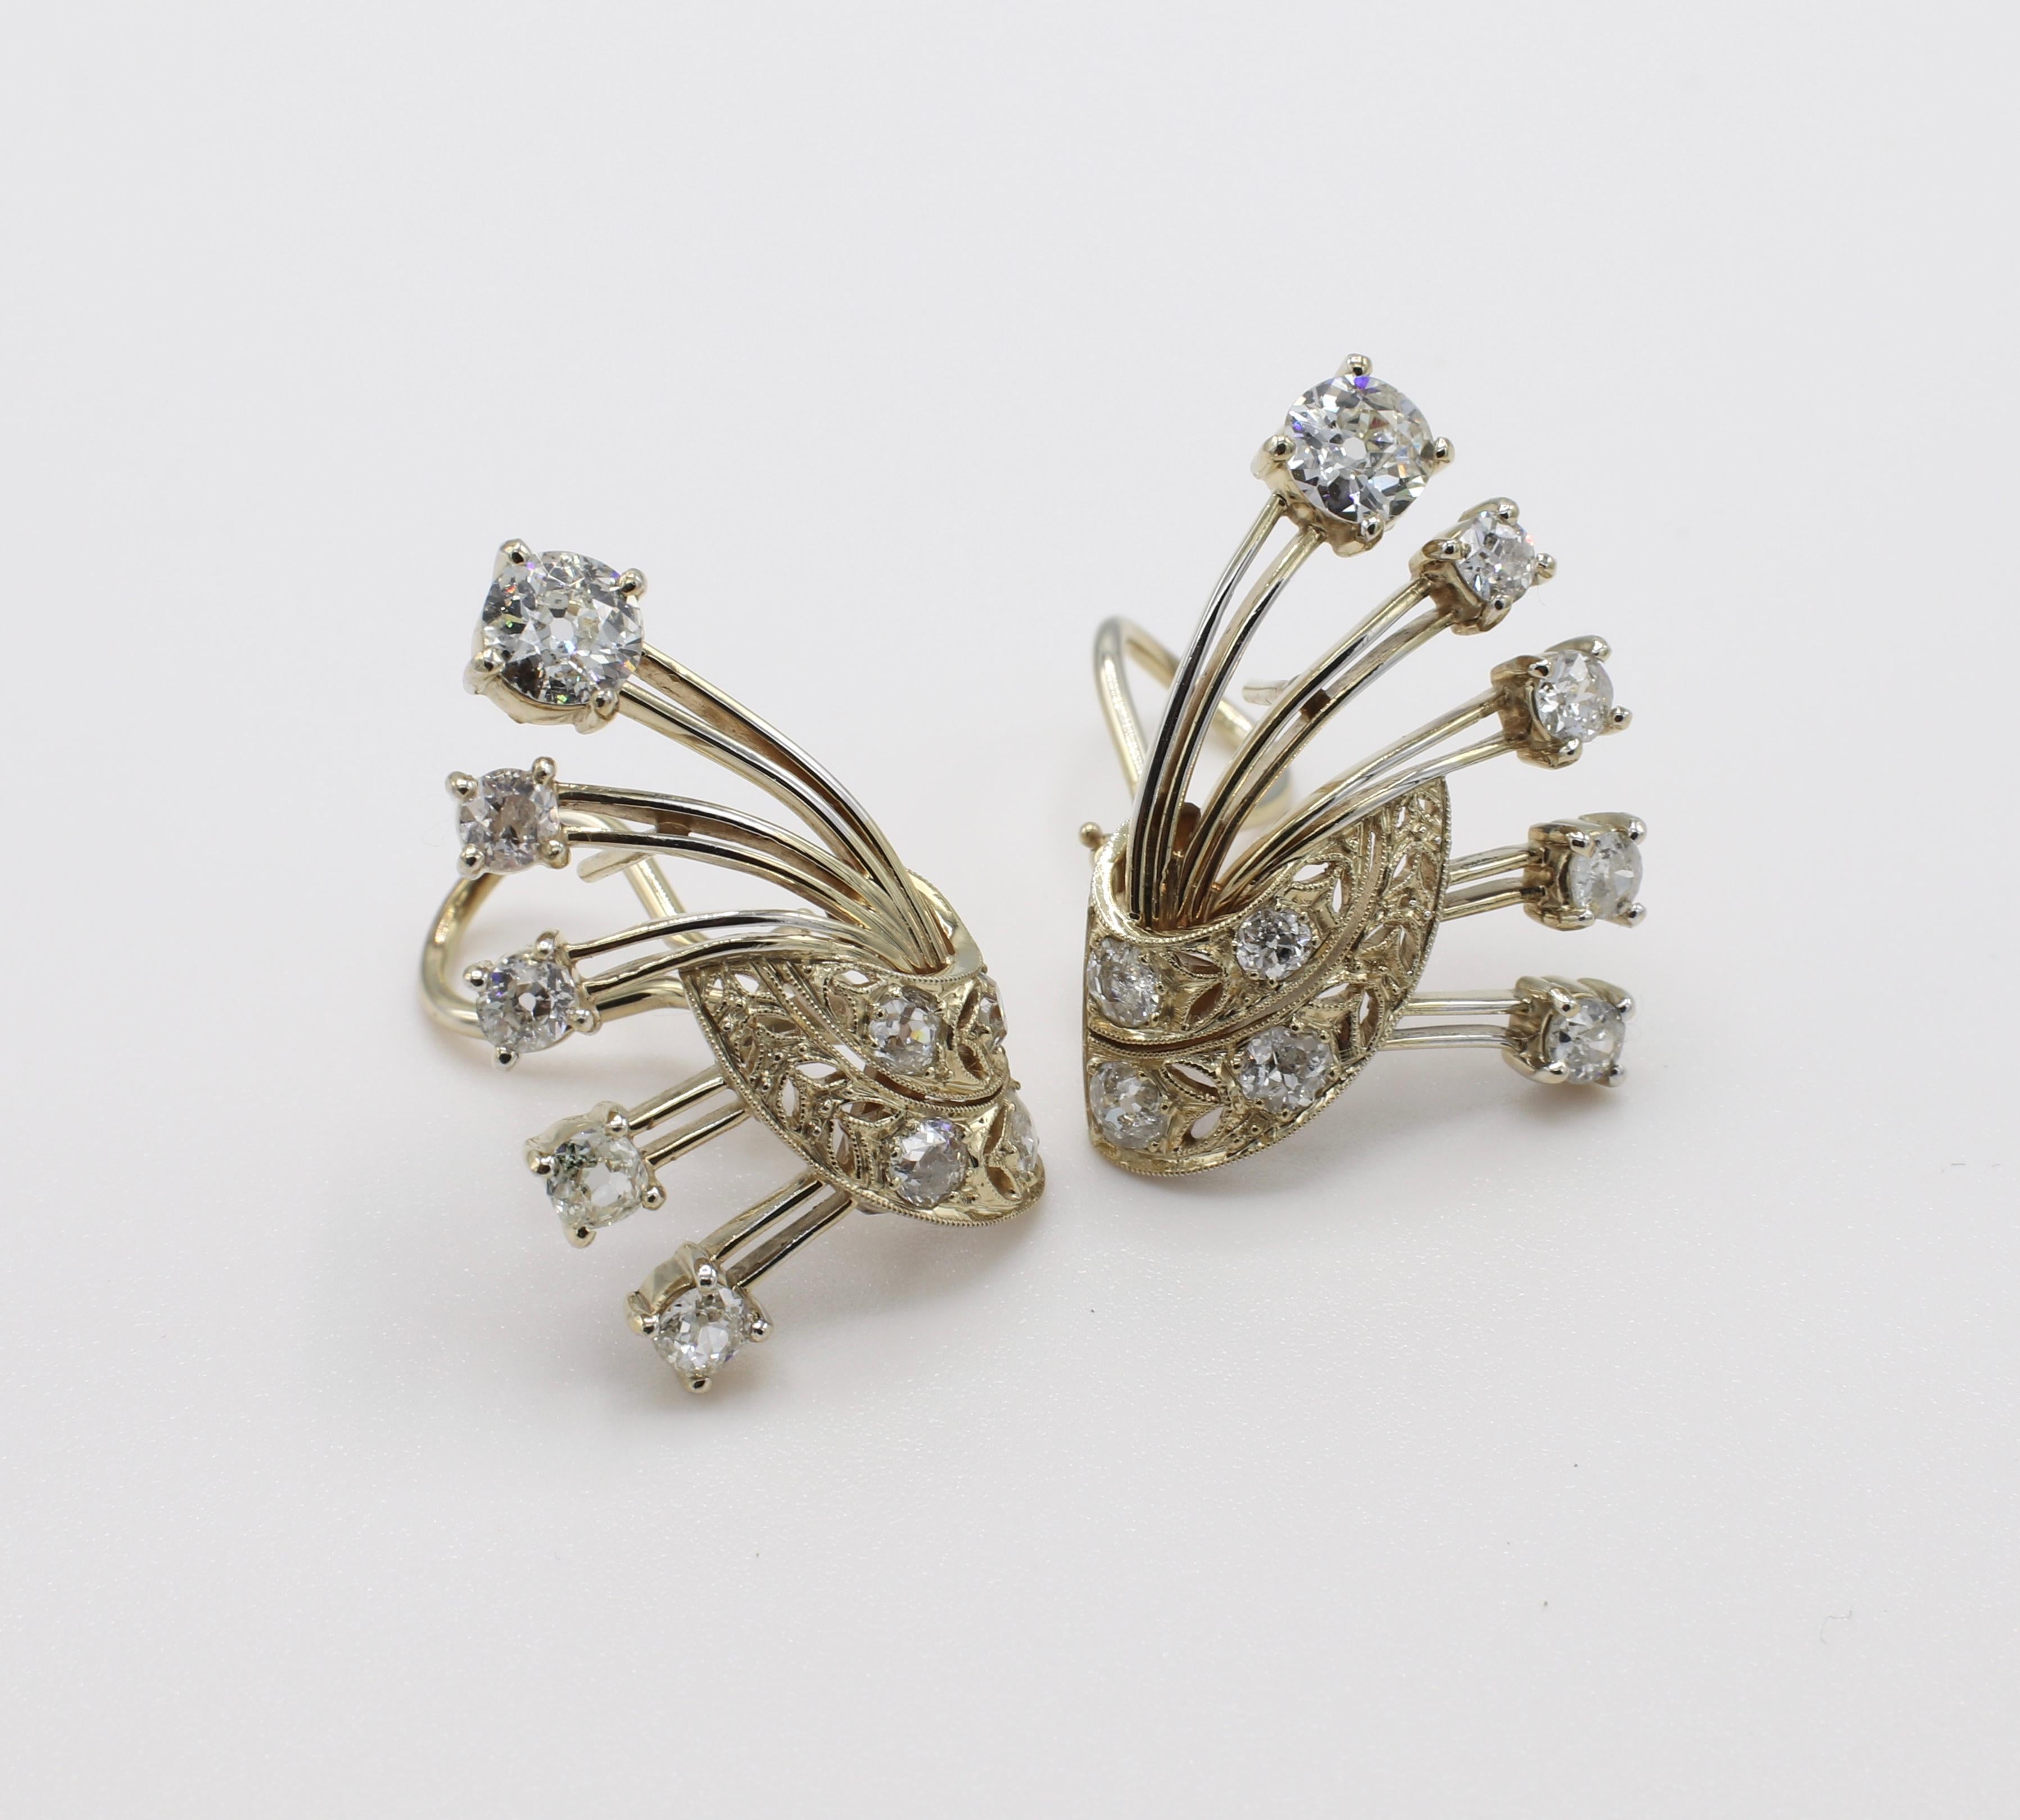 Mid-Century 14K Yellow Gold 3 CTW Old European Cut Diamond Earrings 

Metal: 14k yellow gold
Weight: 13.95 grams
Diamonds: 18 old European cut diamonds, approx. 3 CTW H-I SI
Length: 30mm
Width: 17mm
Backs: Lever backs with posts 
No hallmarks or